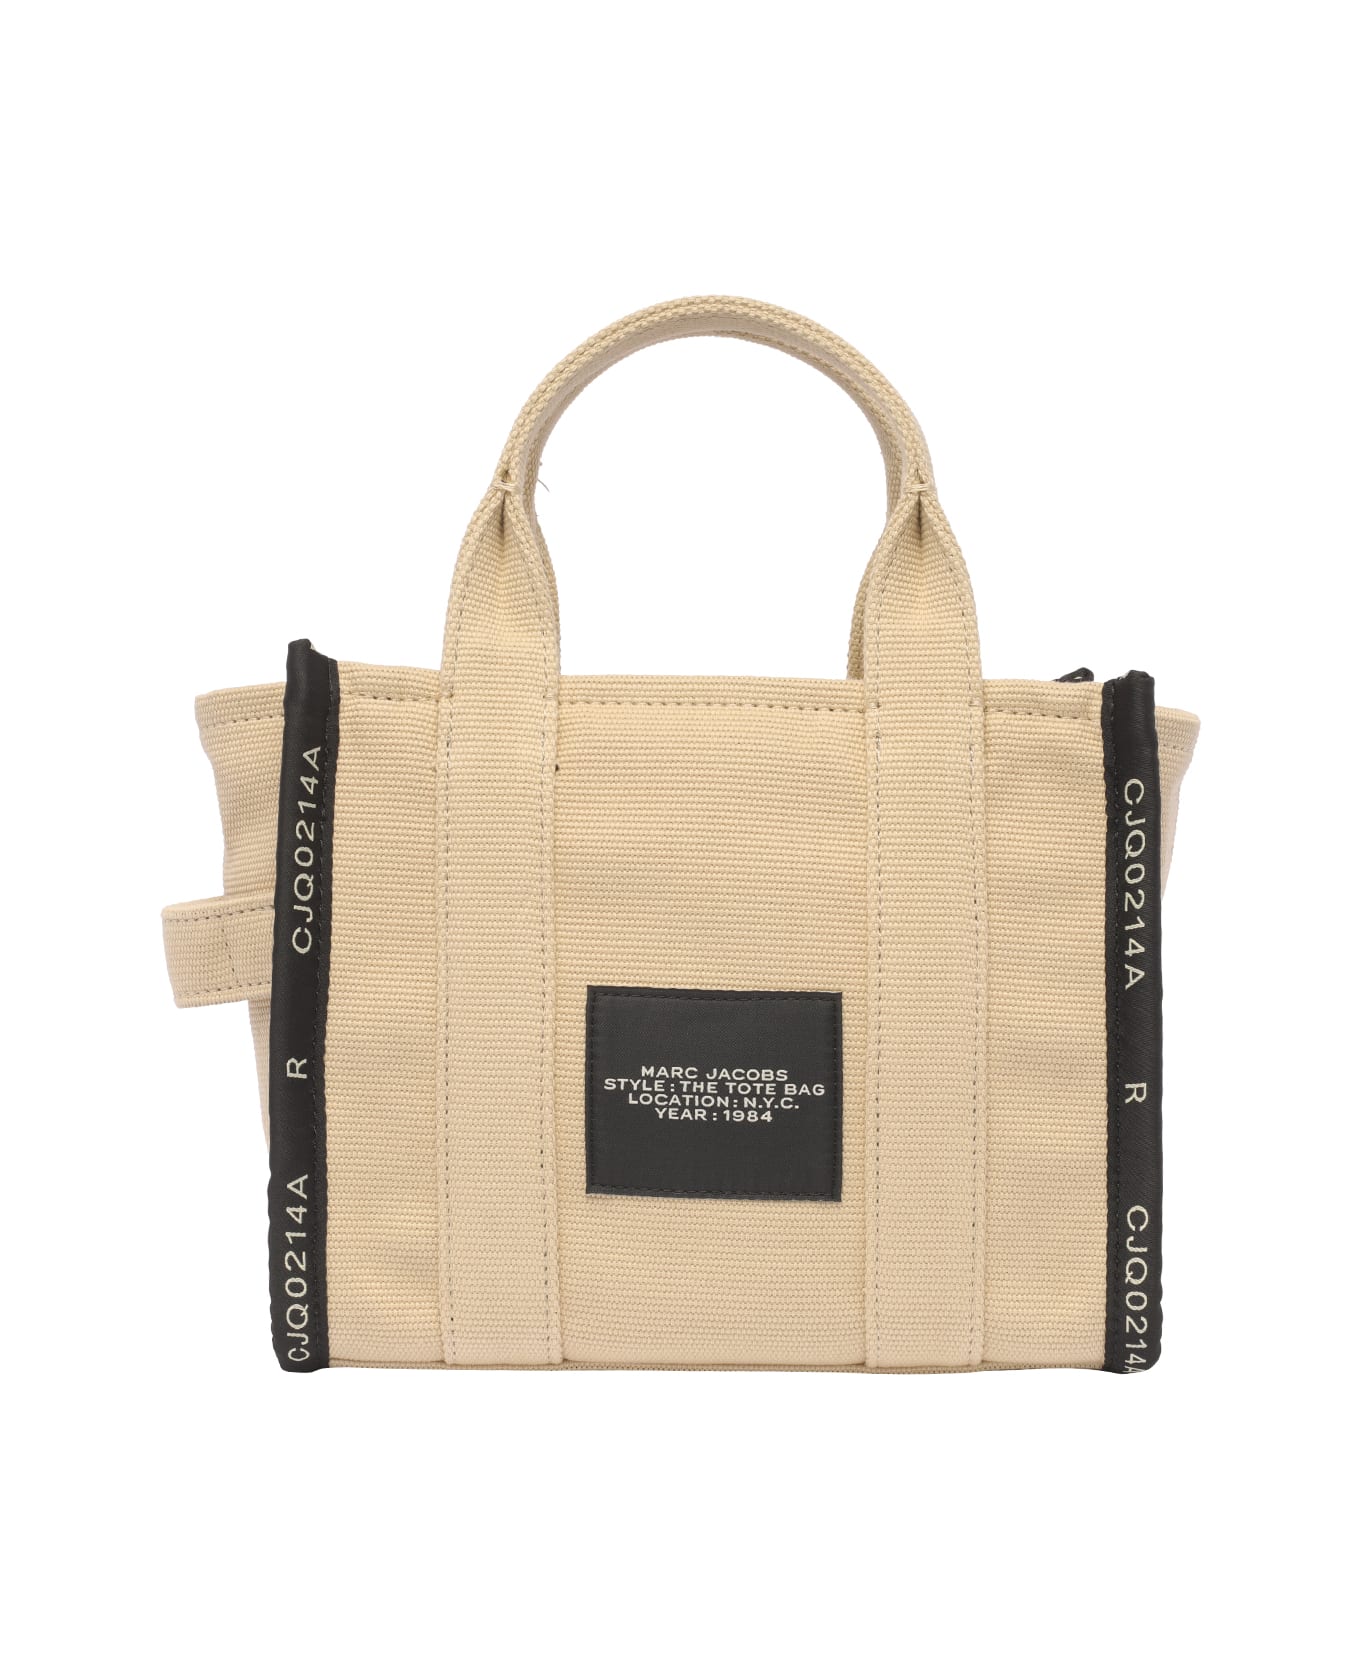 Marc Jacobs The Small Tote Bag - Beige